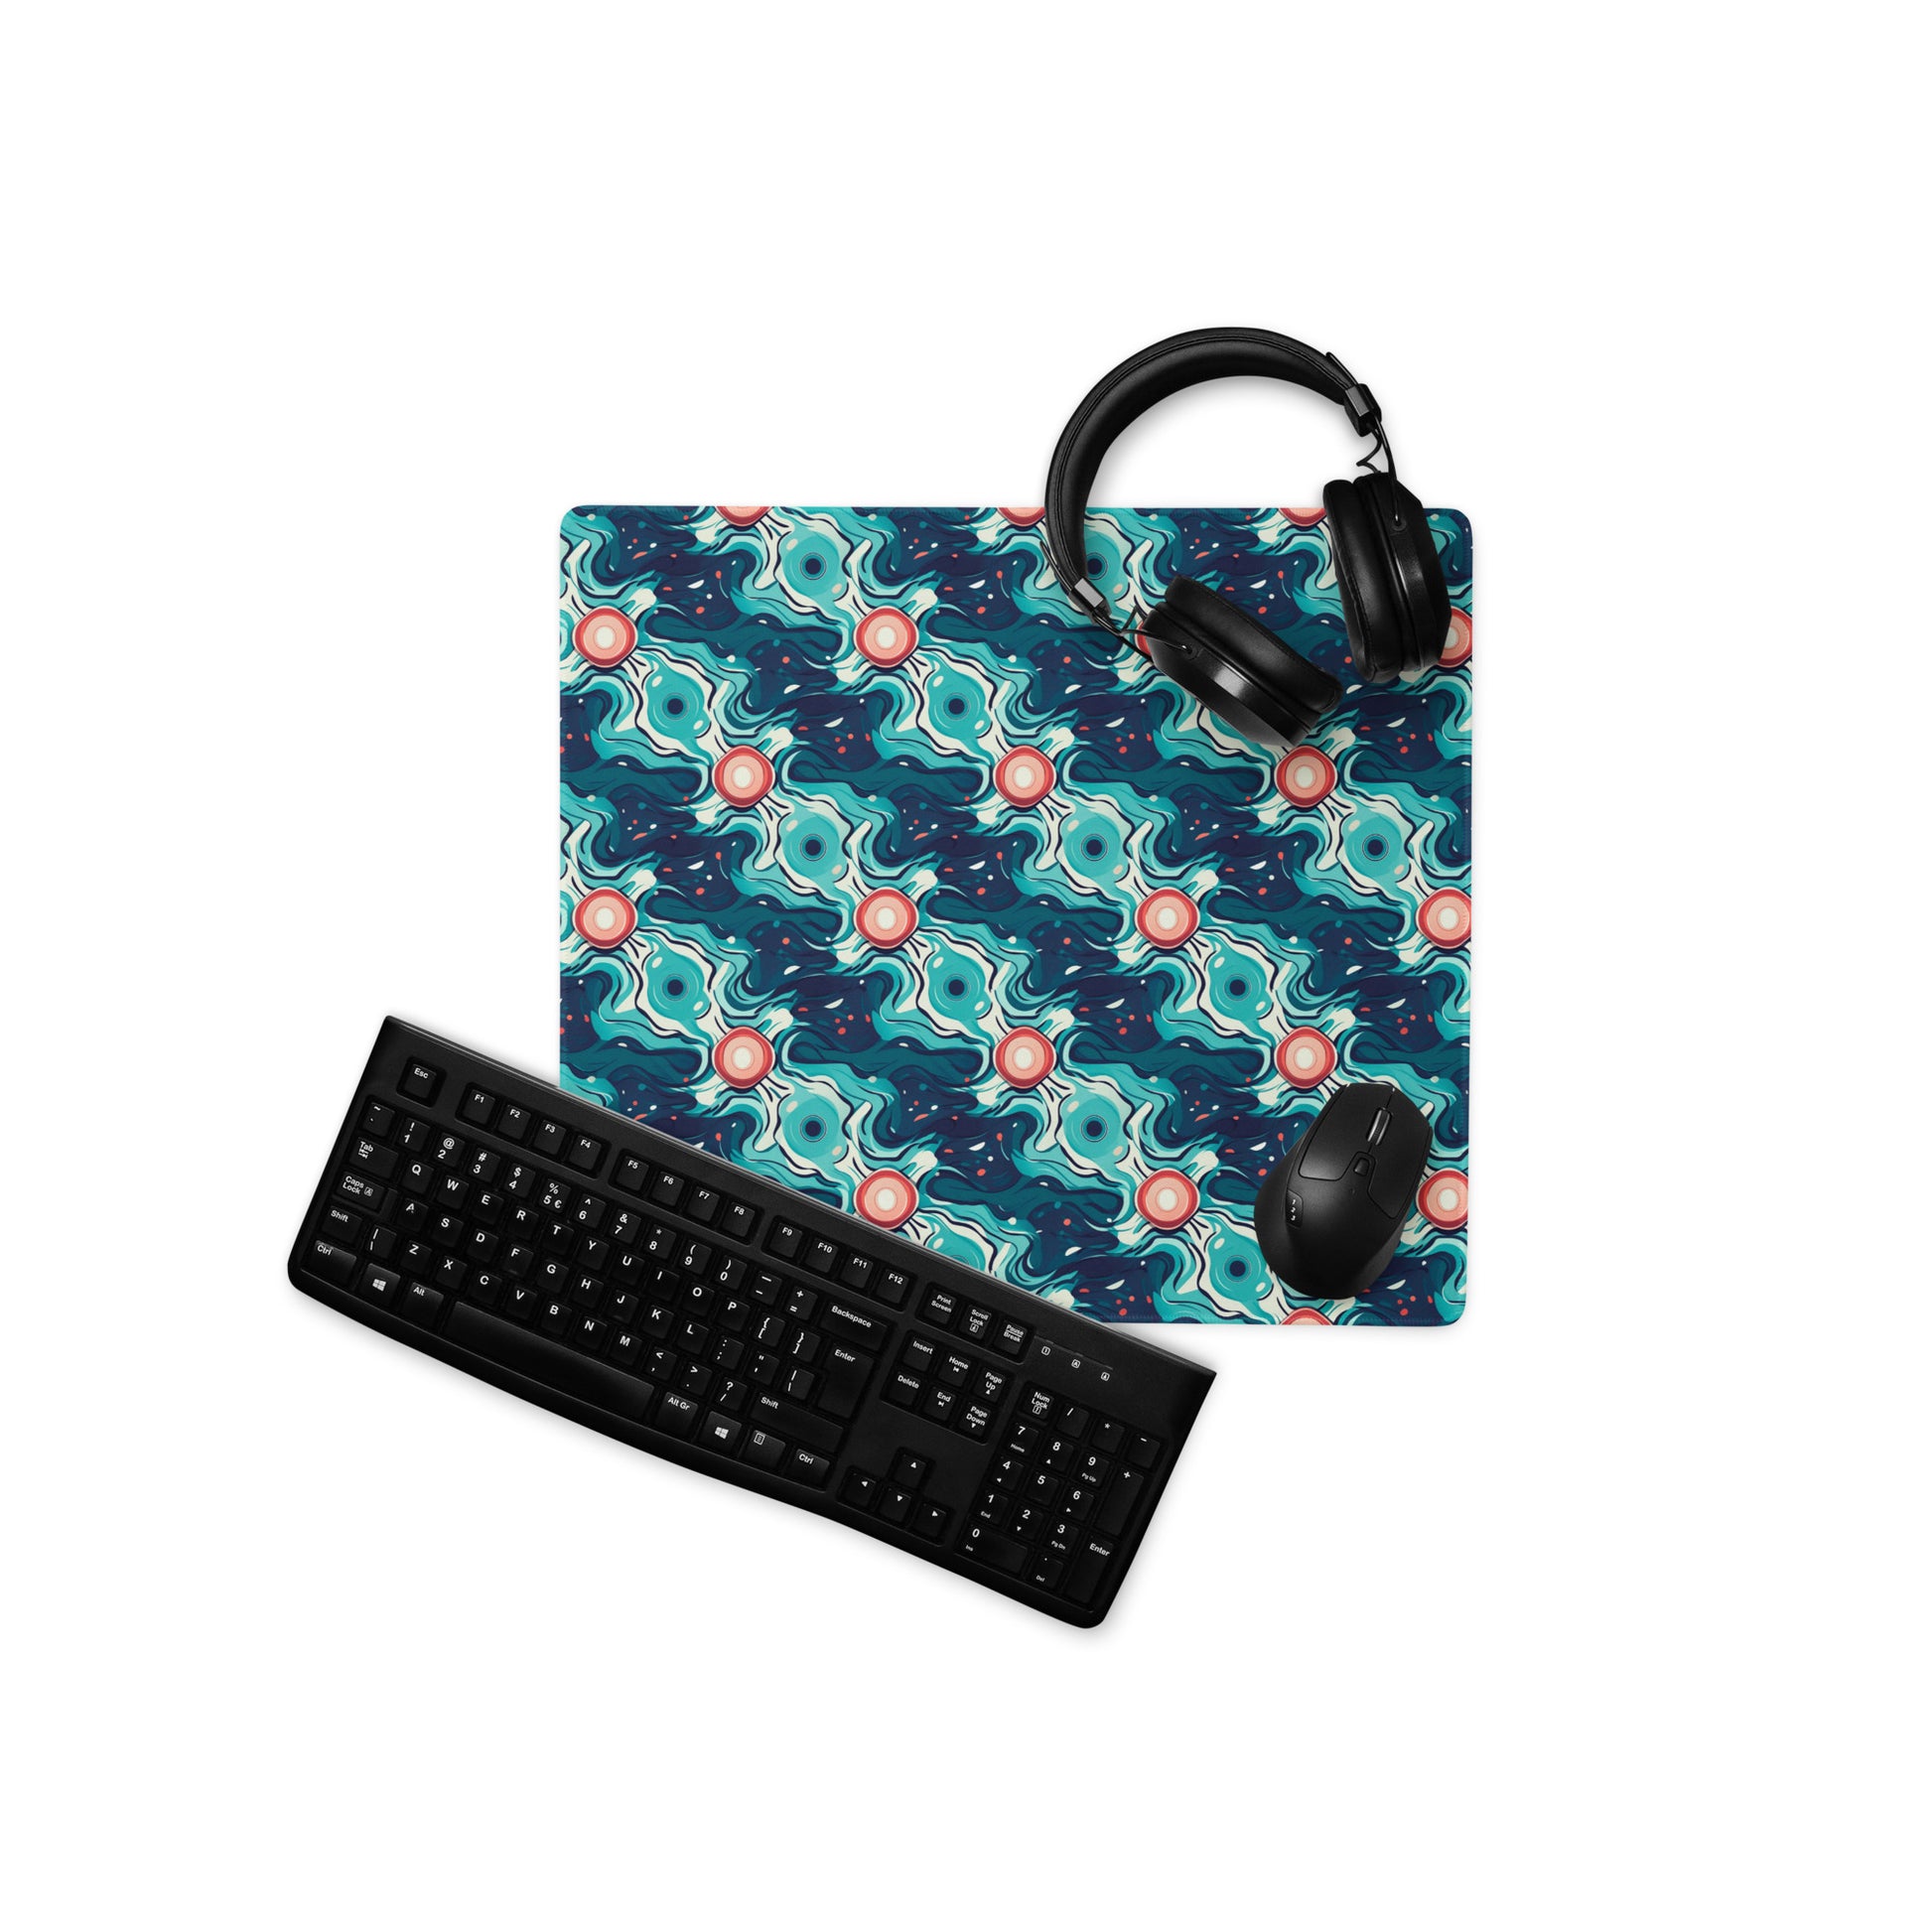 A 18" x 16" desk pad with a teal abstract wavy pattern. With a keyboard, mouse, and headphones sitting on it.